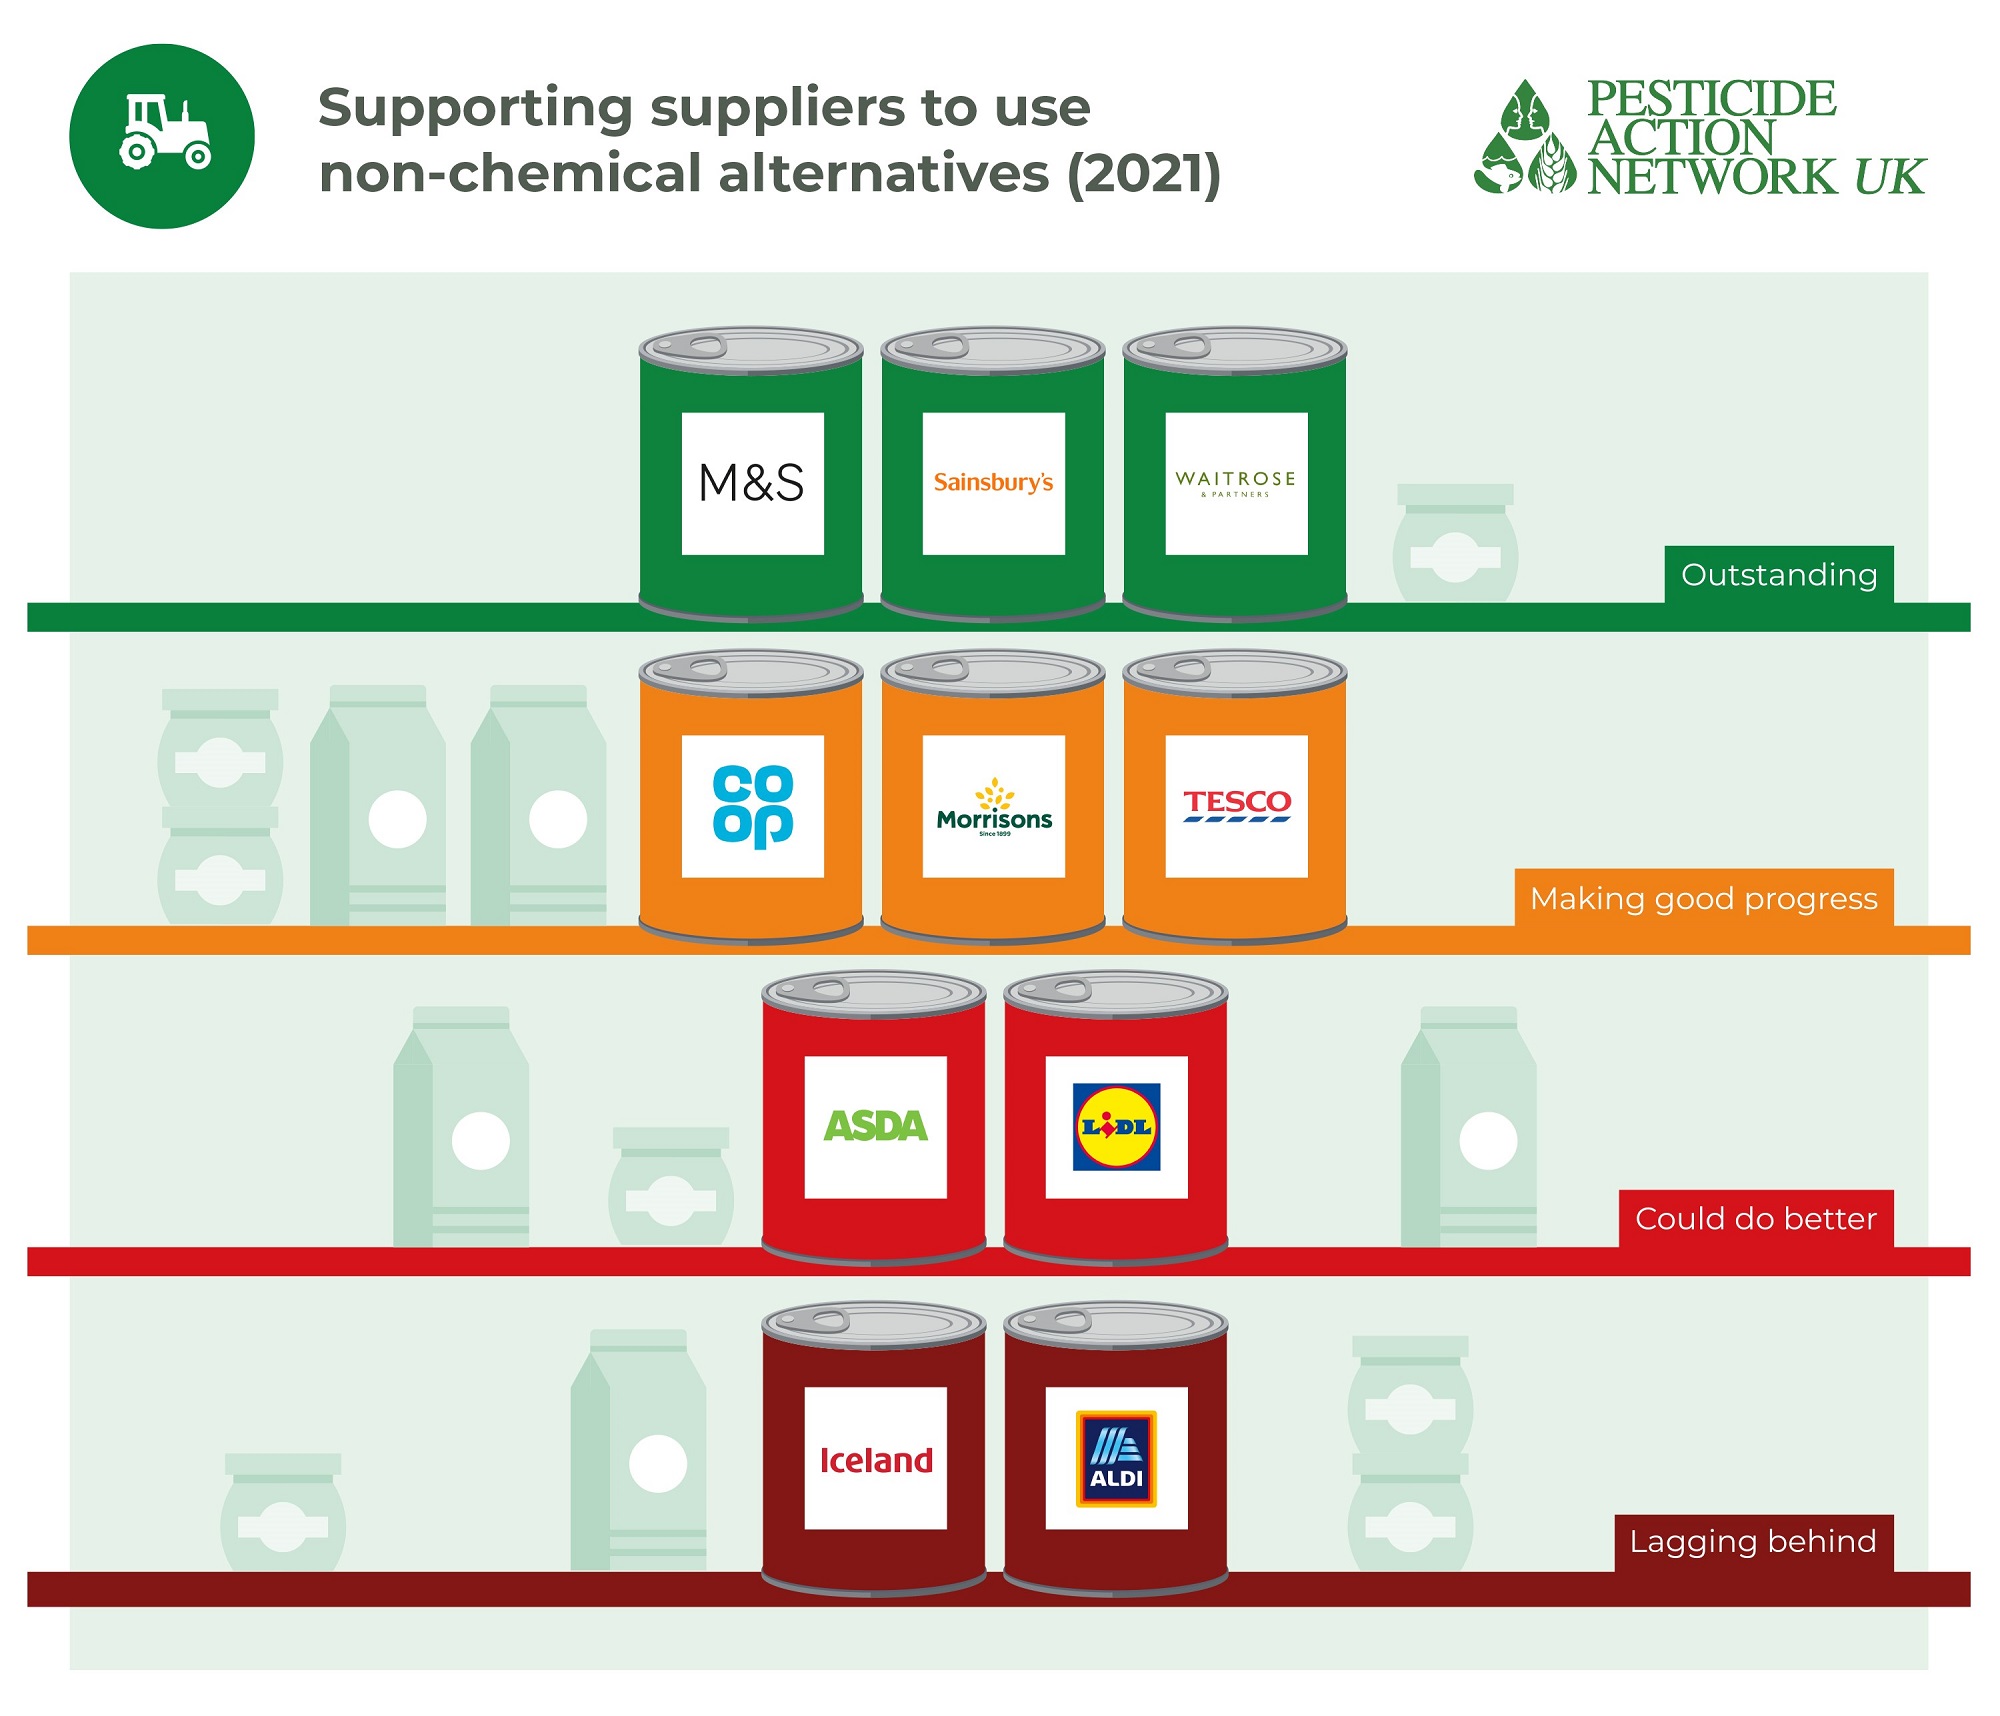 Are supermarkets supporting suppliers to use non-chemical alternatives?